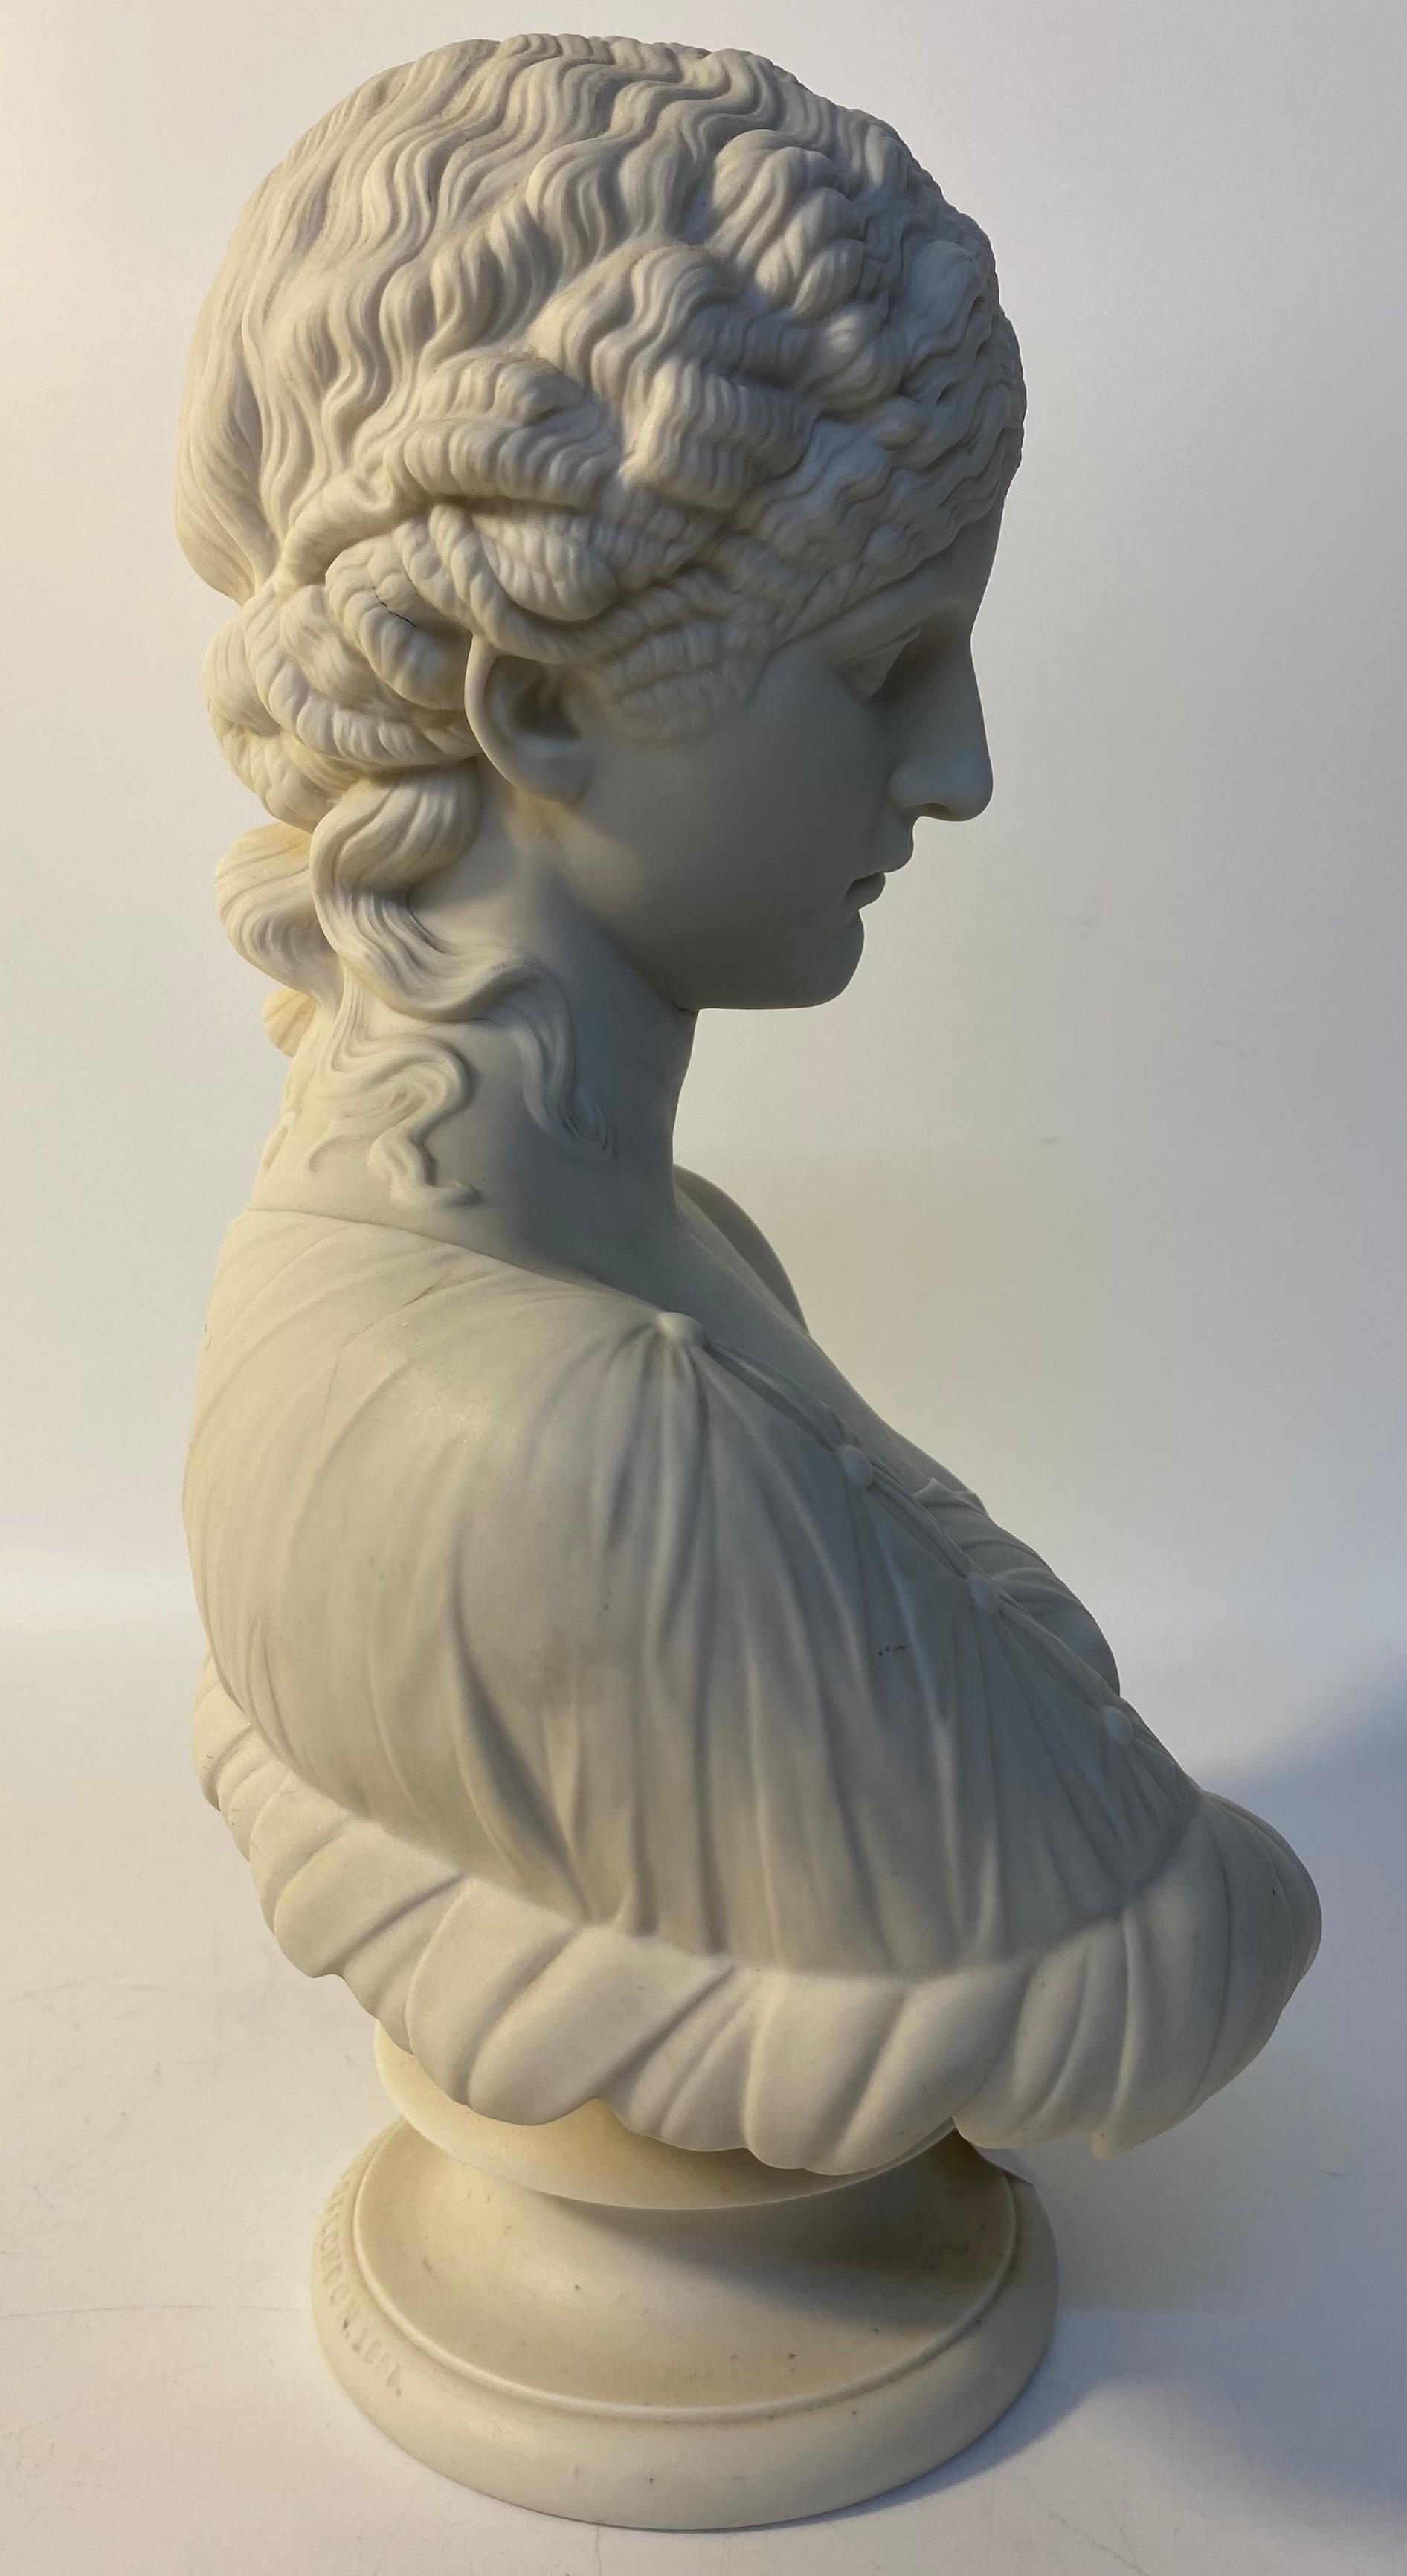 Parian Ware Bust Of Clytie Sculpted By C. Delpech [24x33cm] - Image 5 of 5